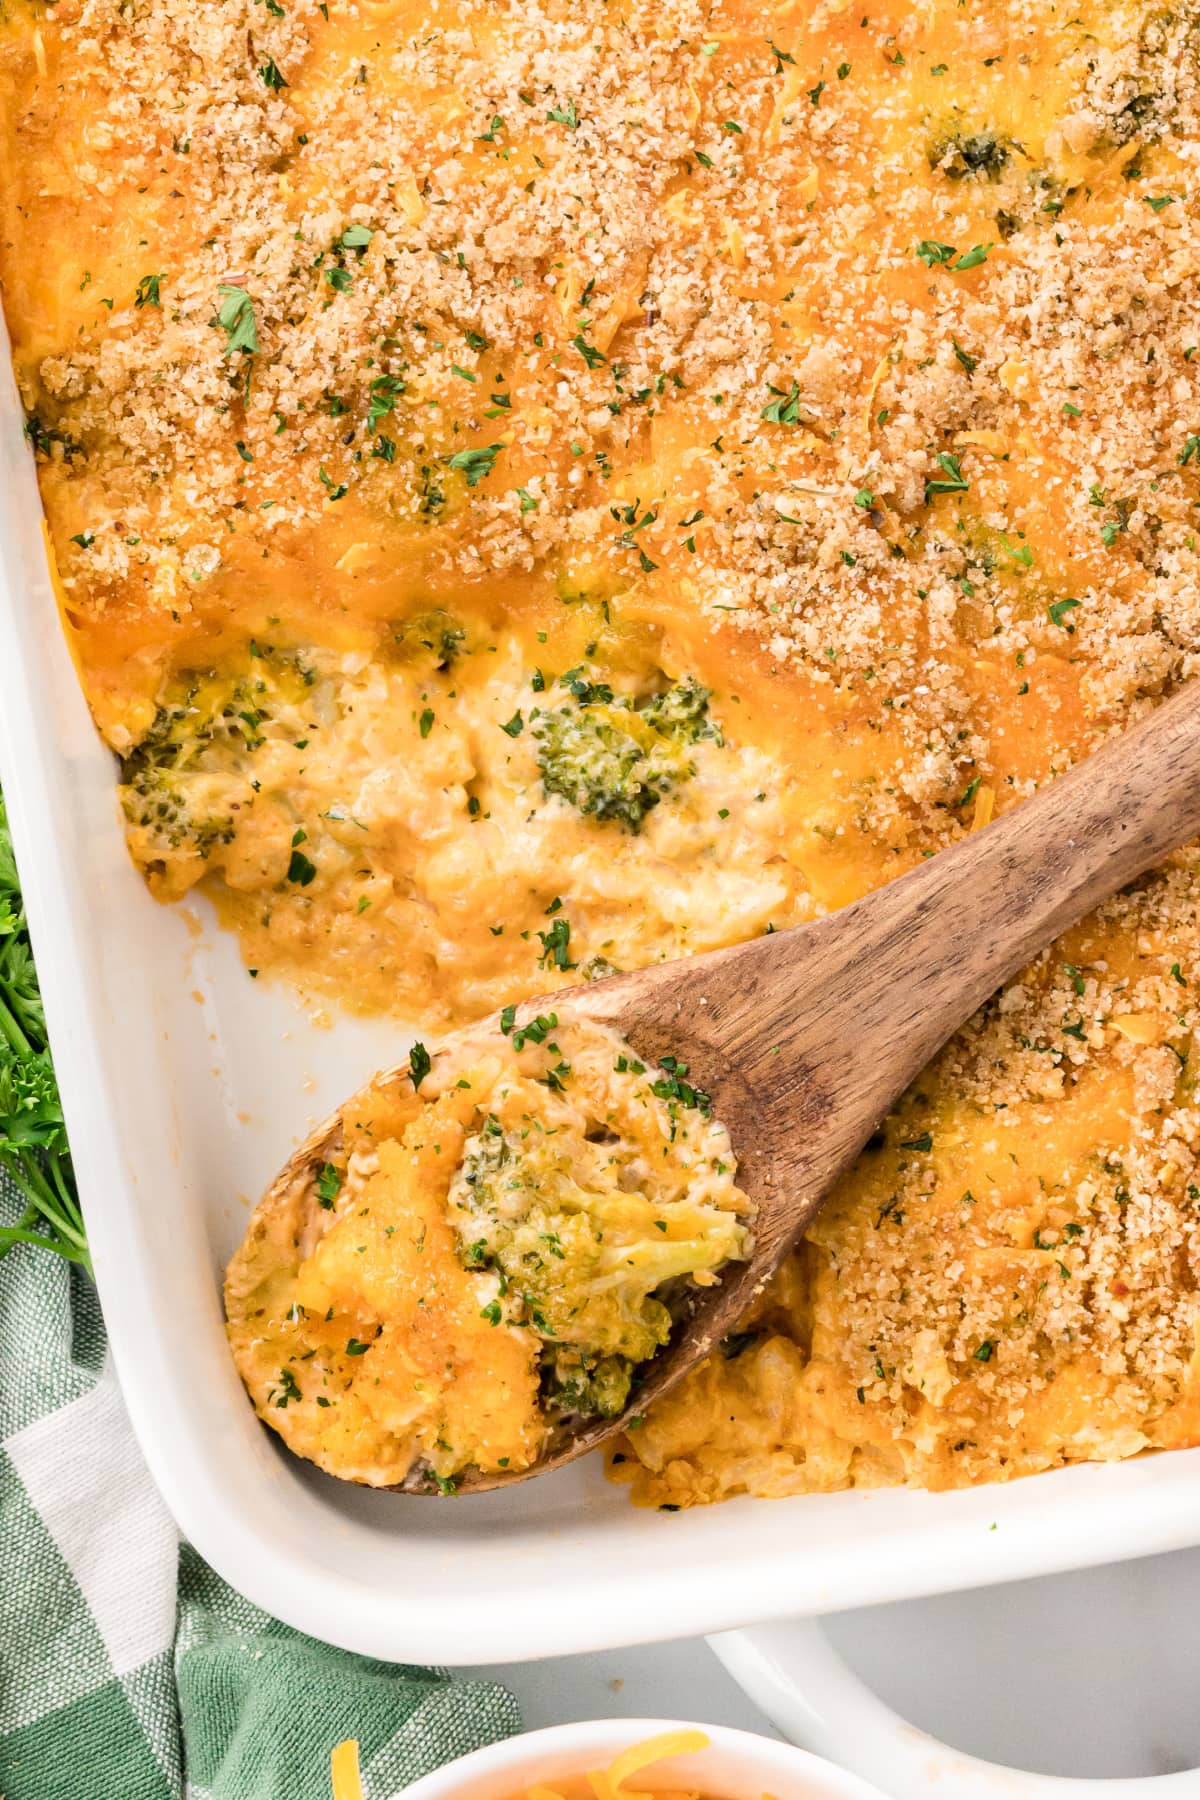 Cheesy Broccoli Rice Casserole in a baking dish with a wooden spoon